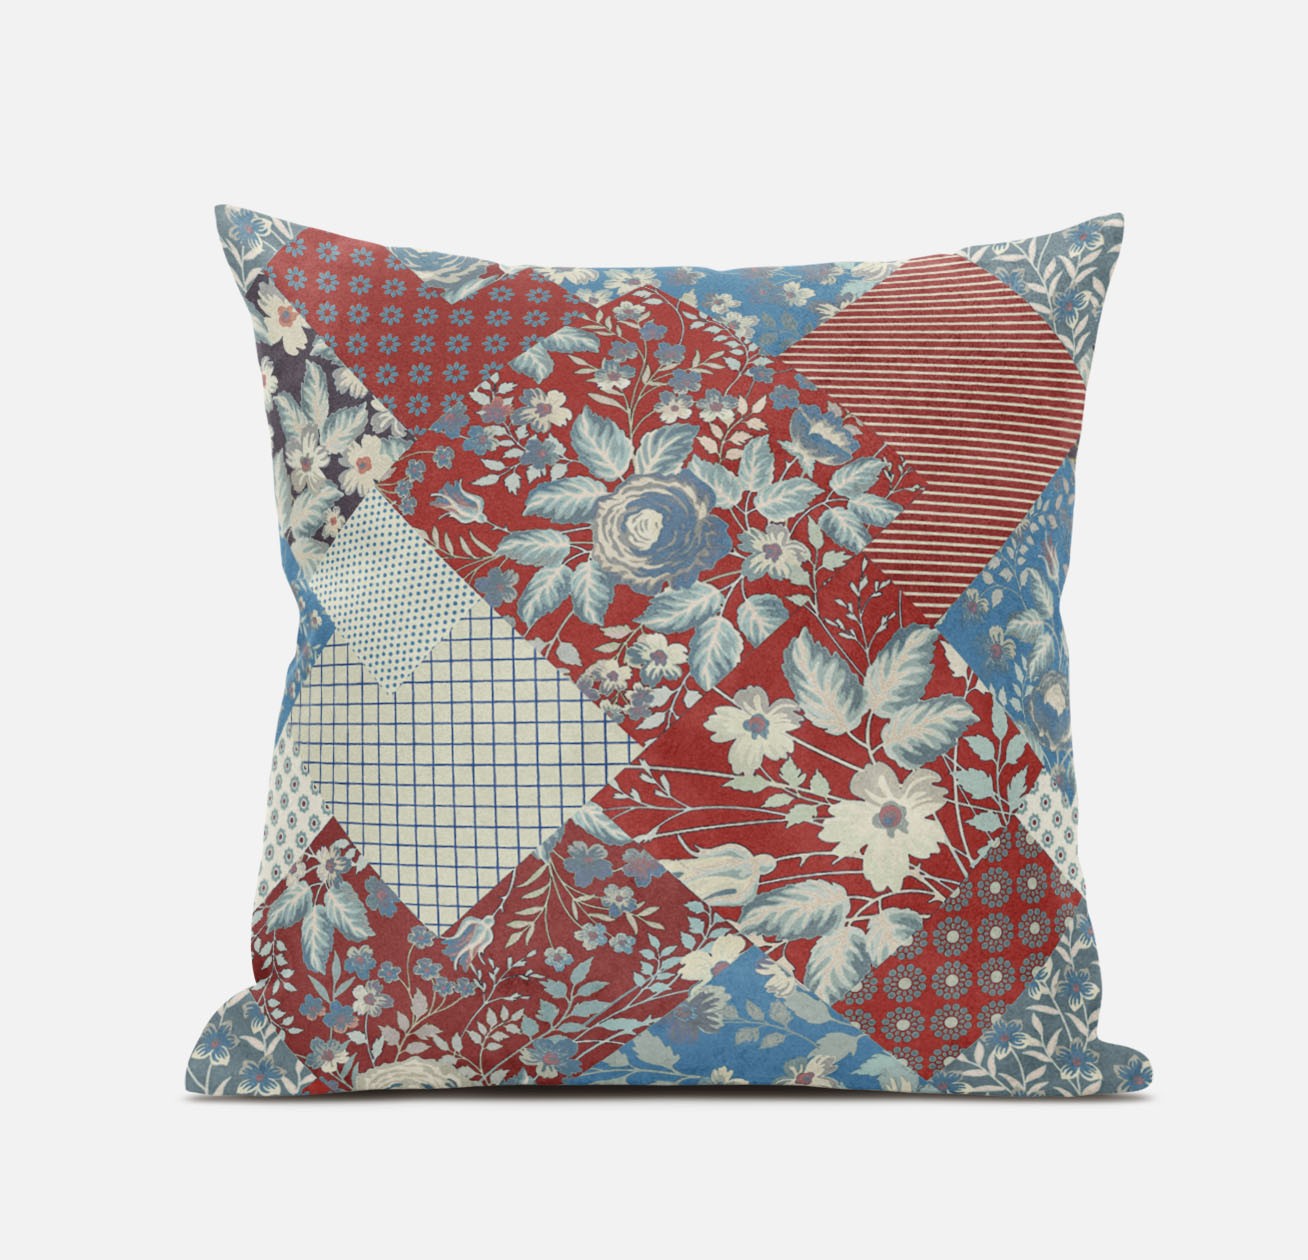 20"Aqua Red Floral Zippered Suede Throw Pillow-413467-1